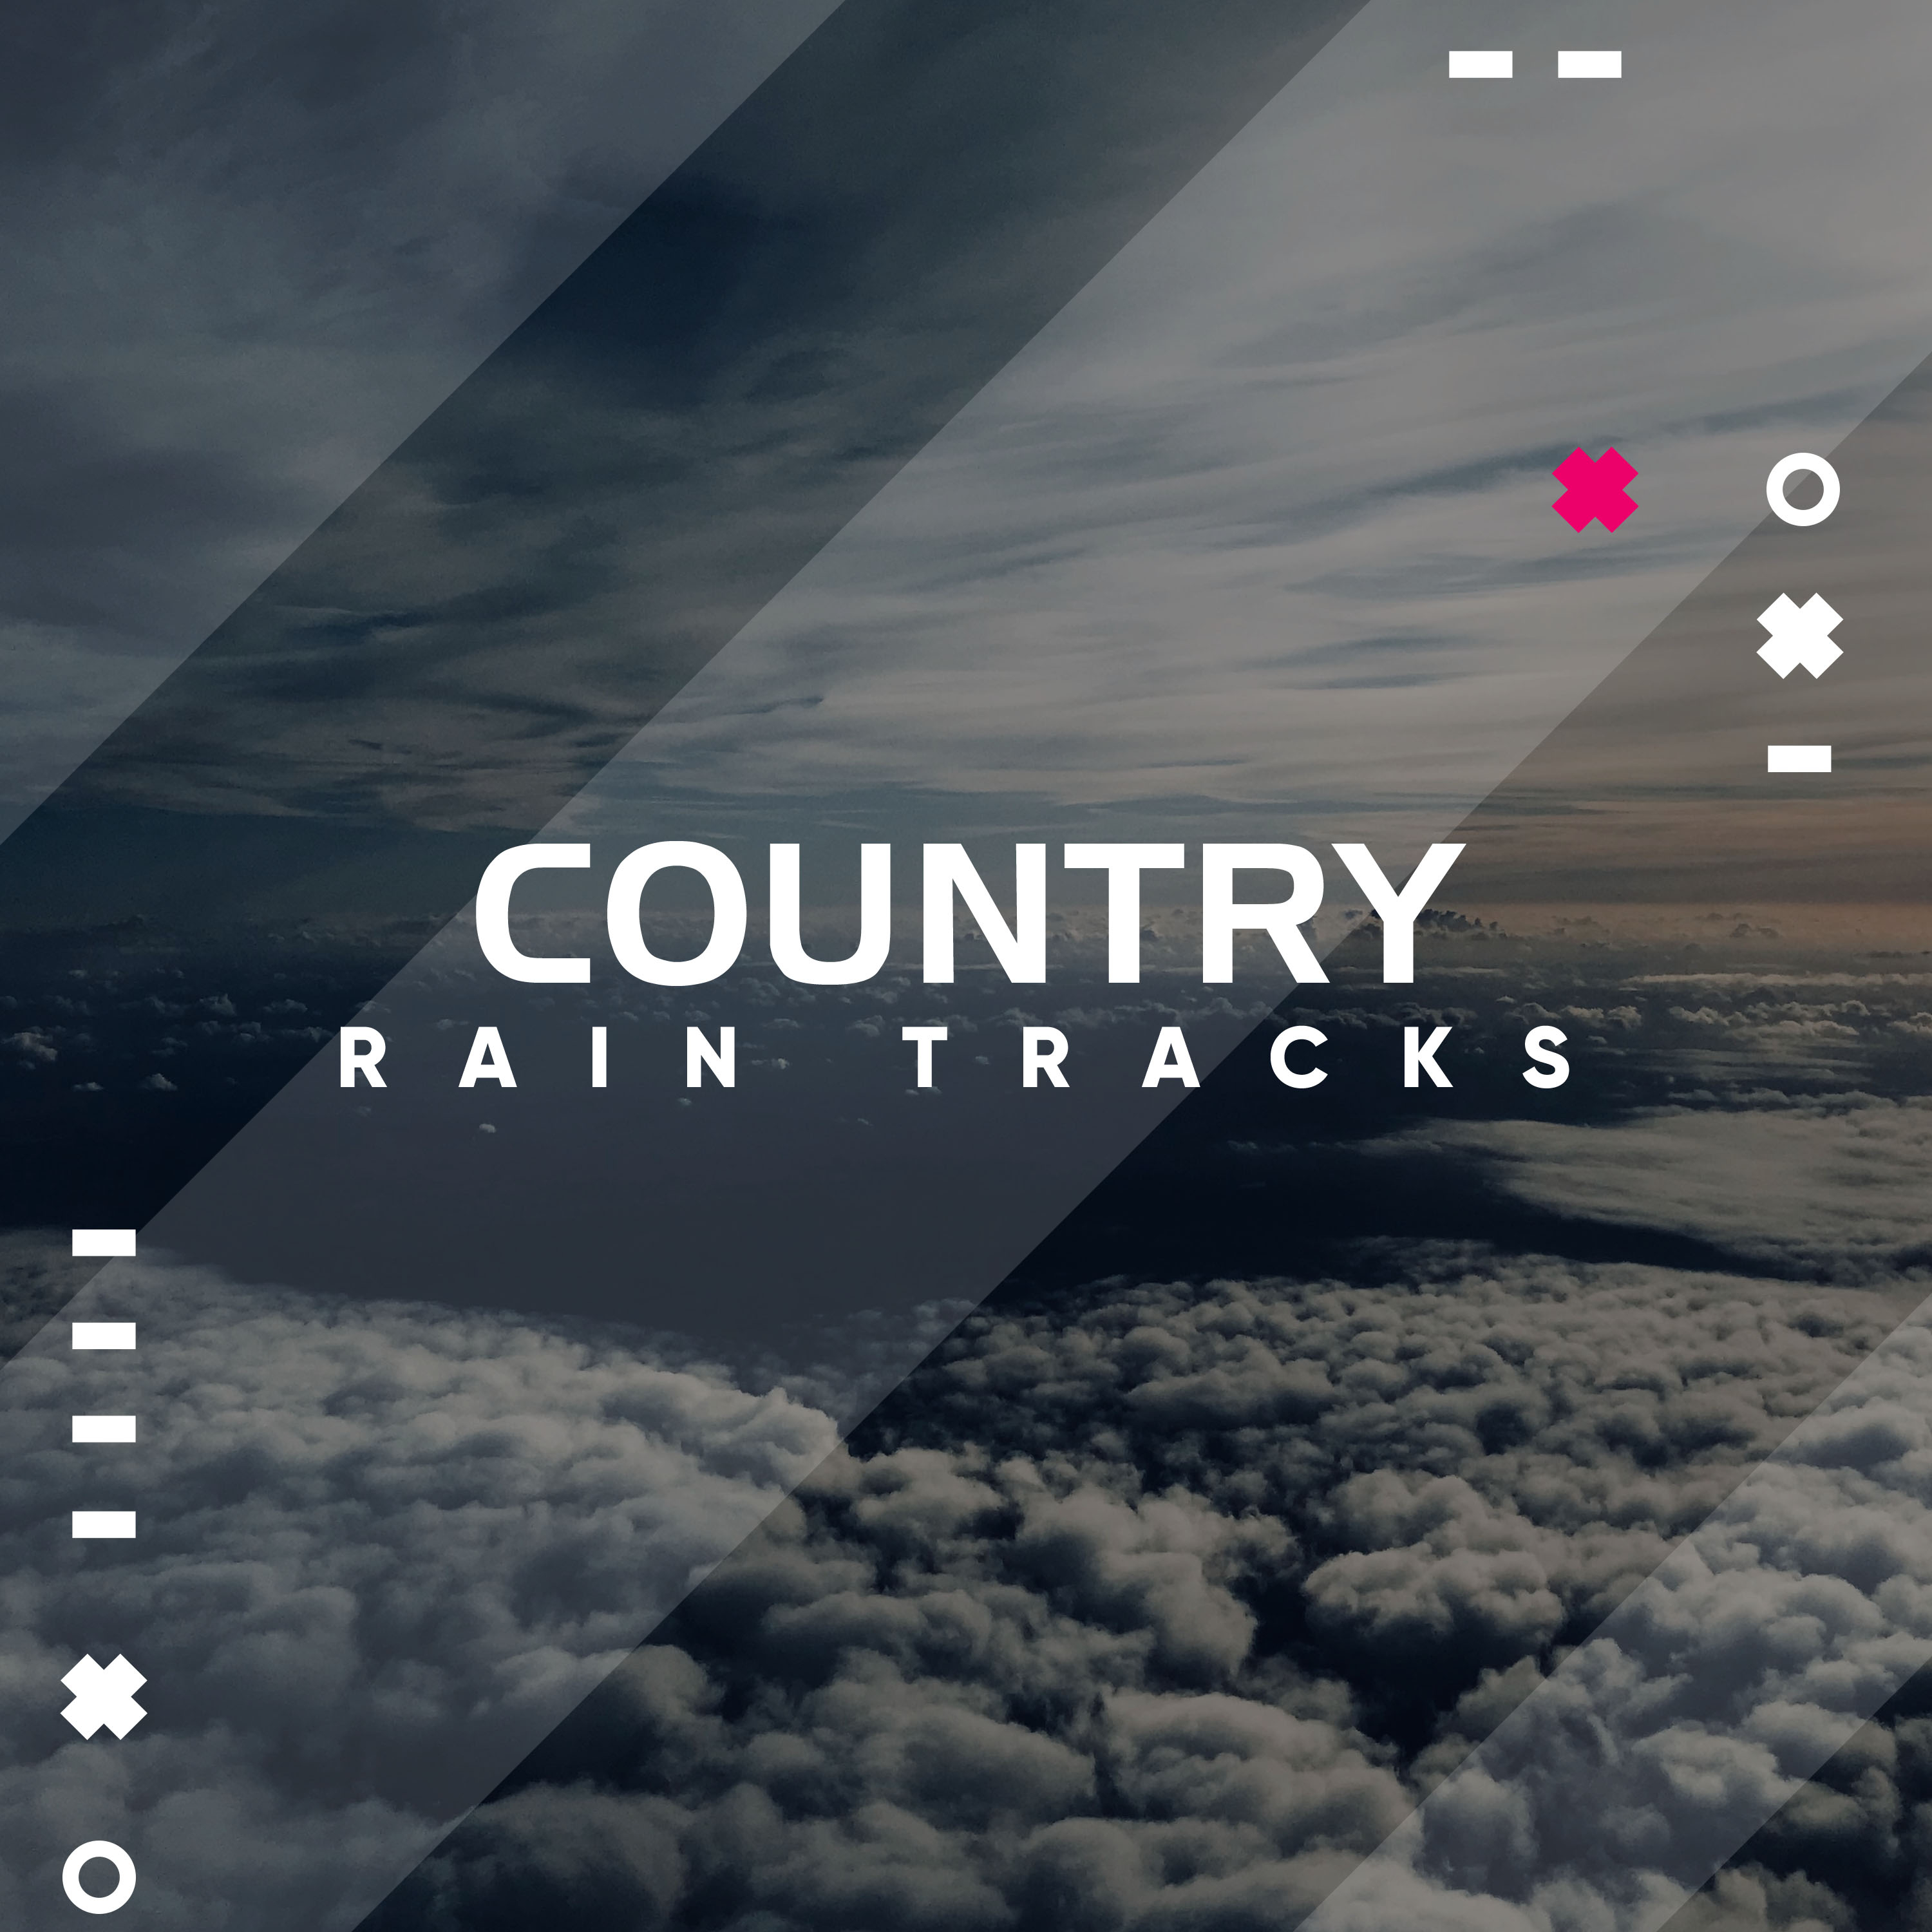 24 Country Rain Tracks to Calm the Mind & Relax